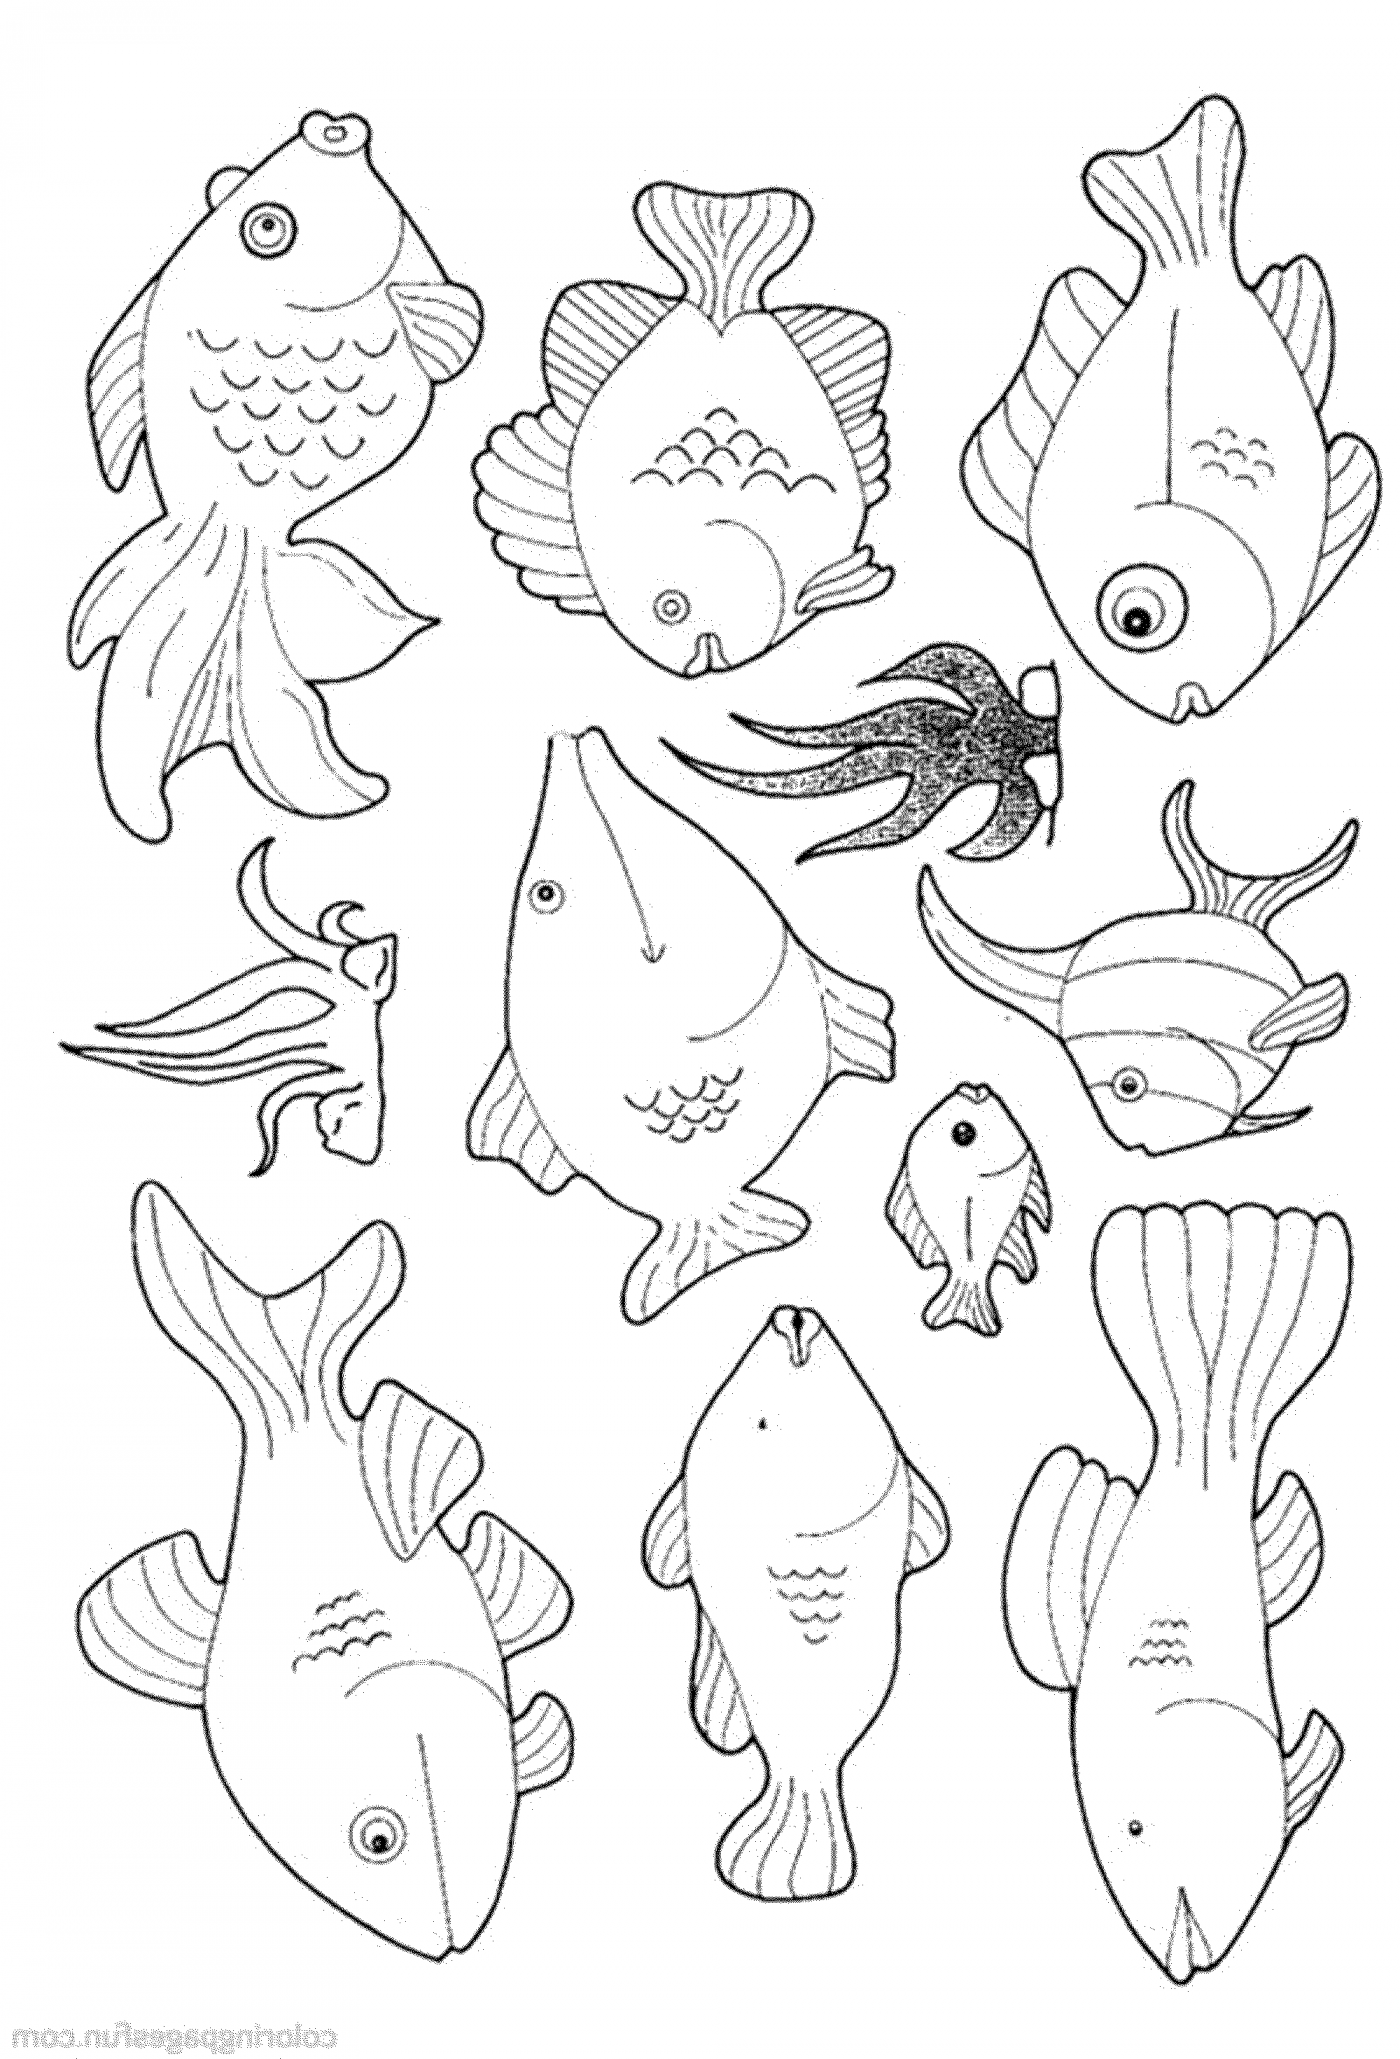 Print & Download Cute and Educative Fish Coloring Pages